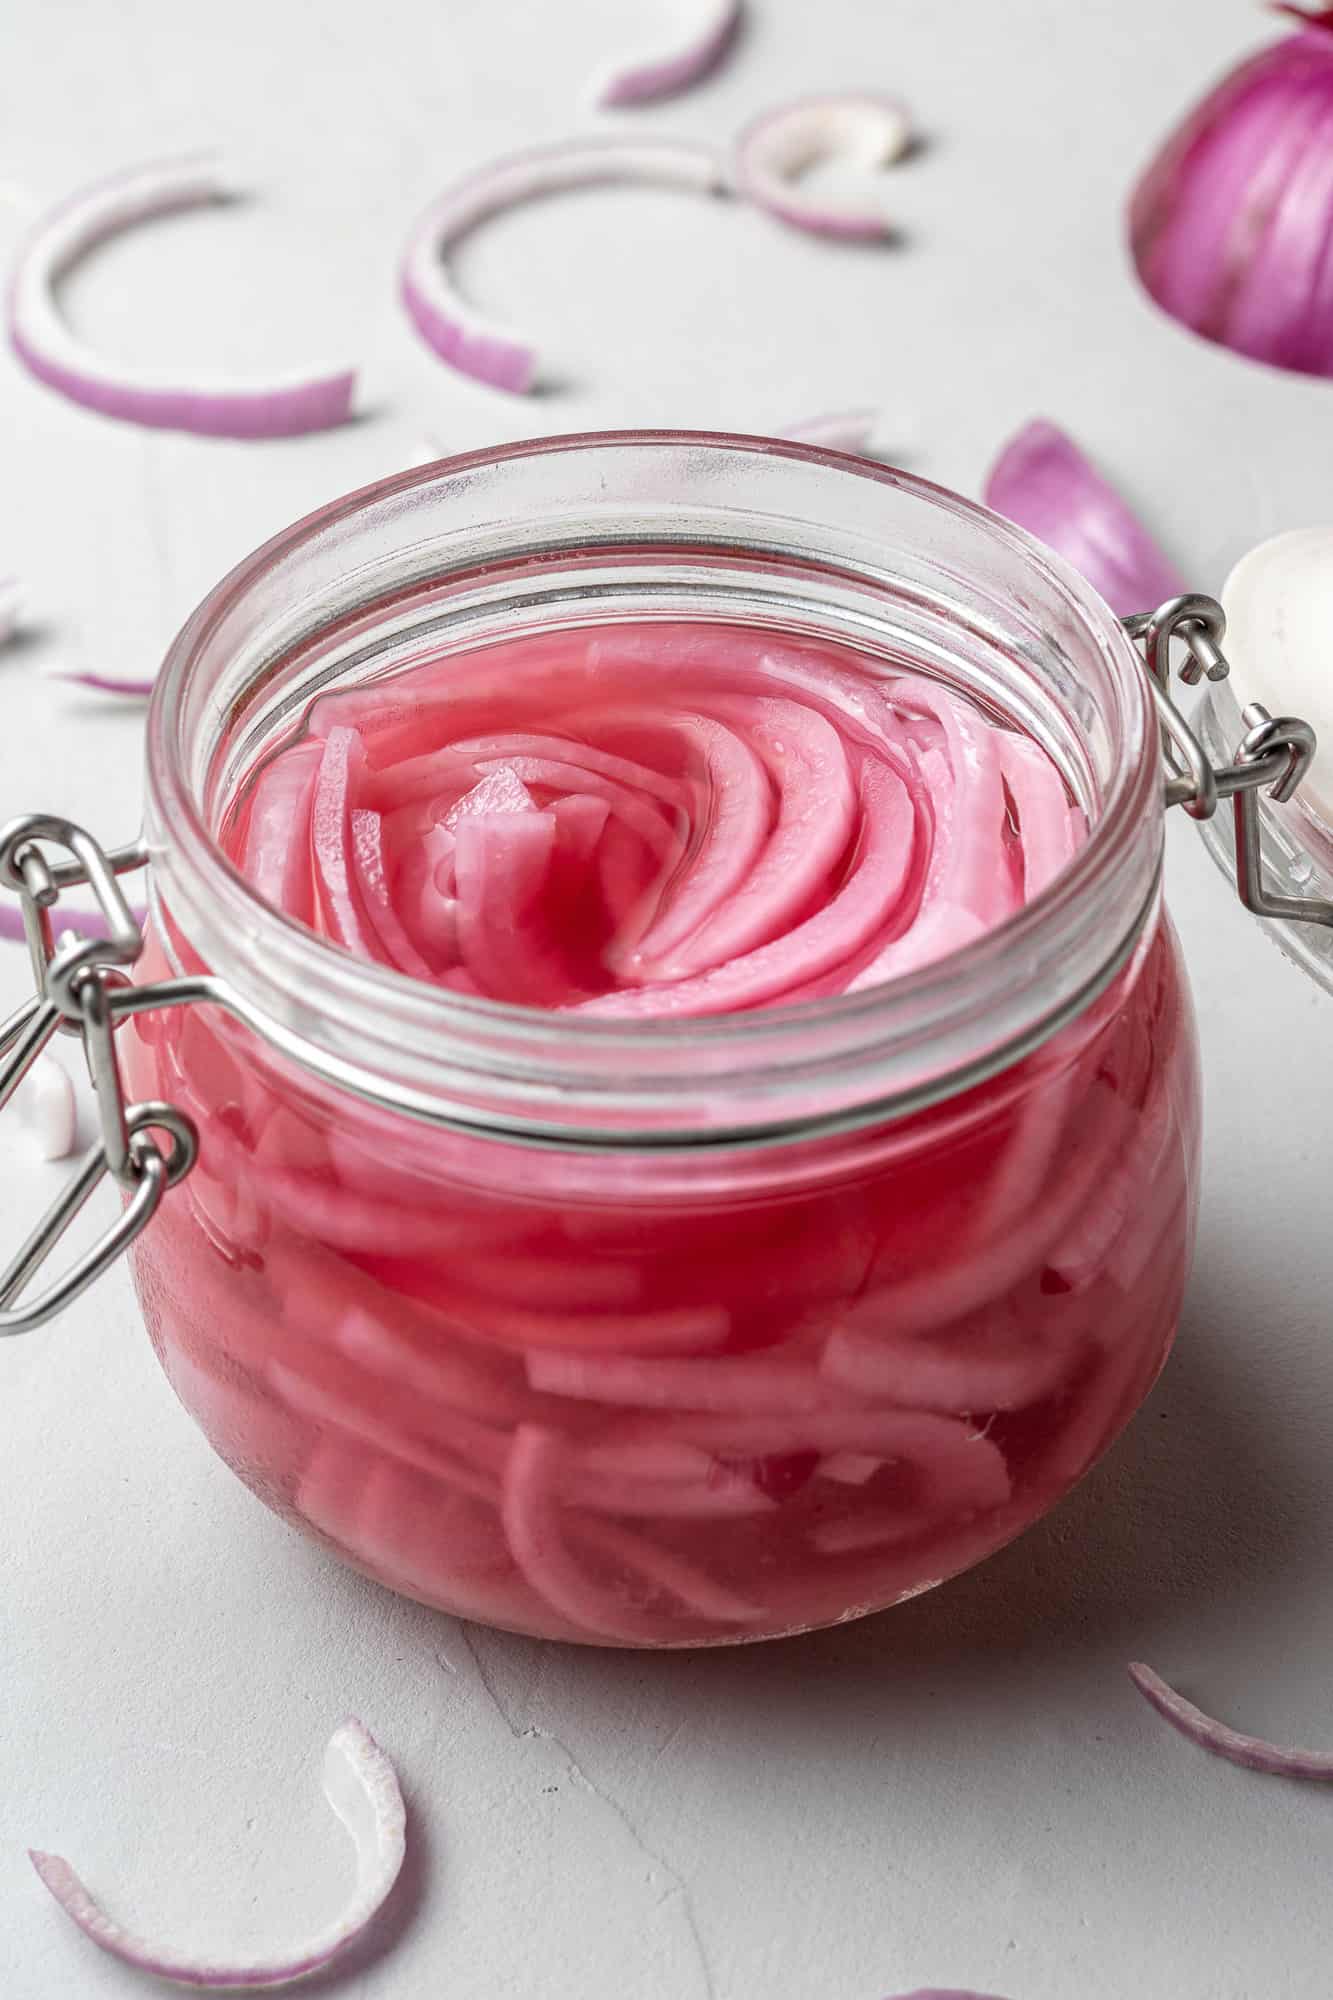 Pickled red onions in a small clear glass jar.